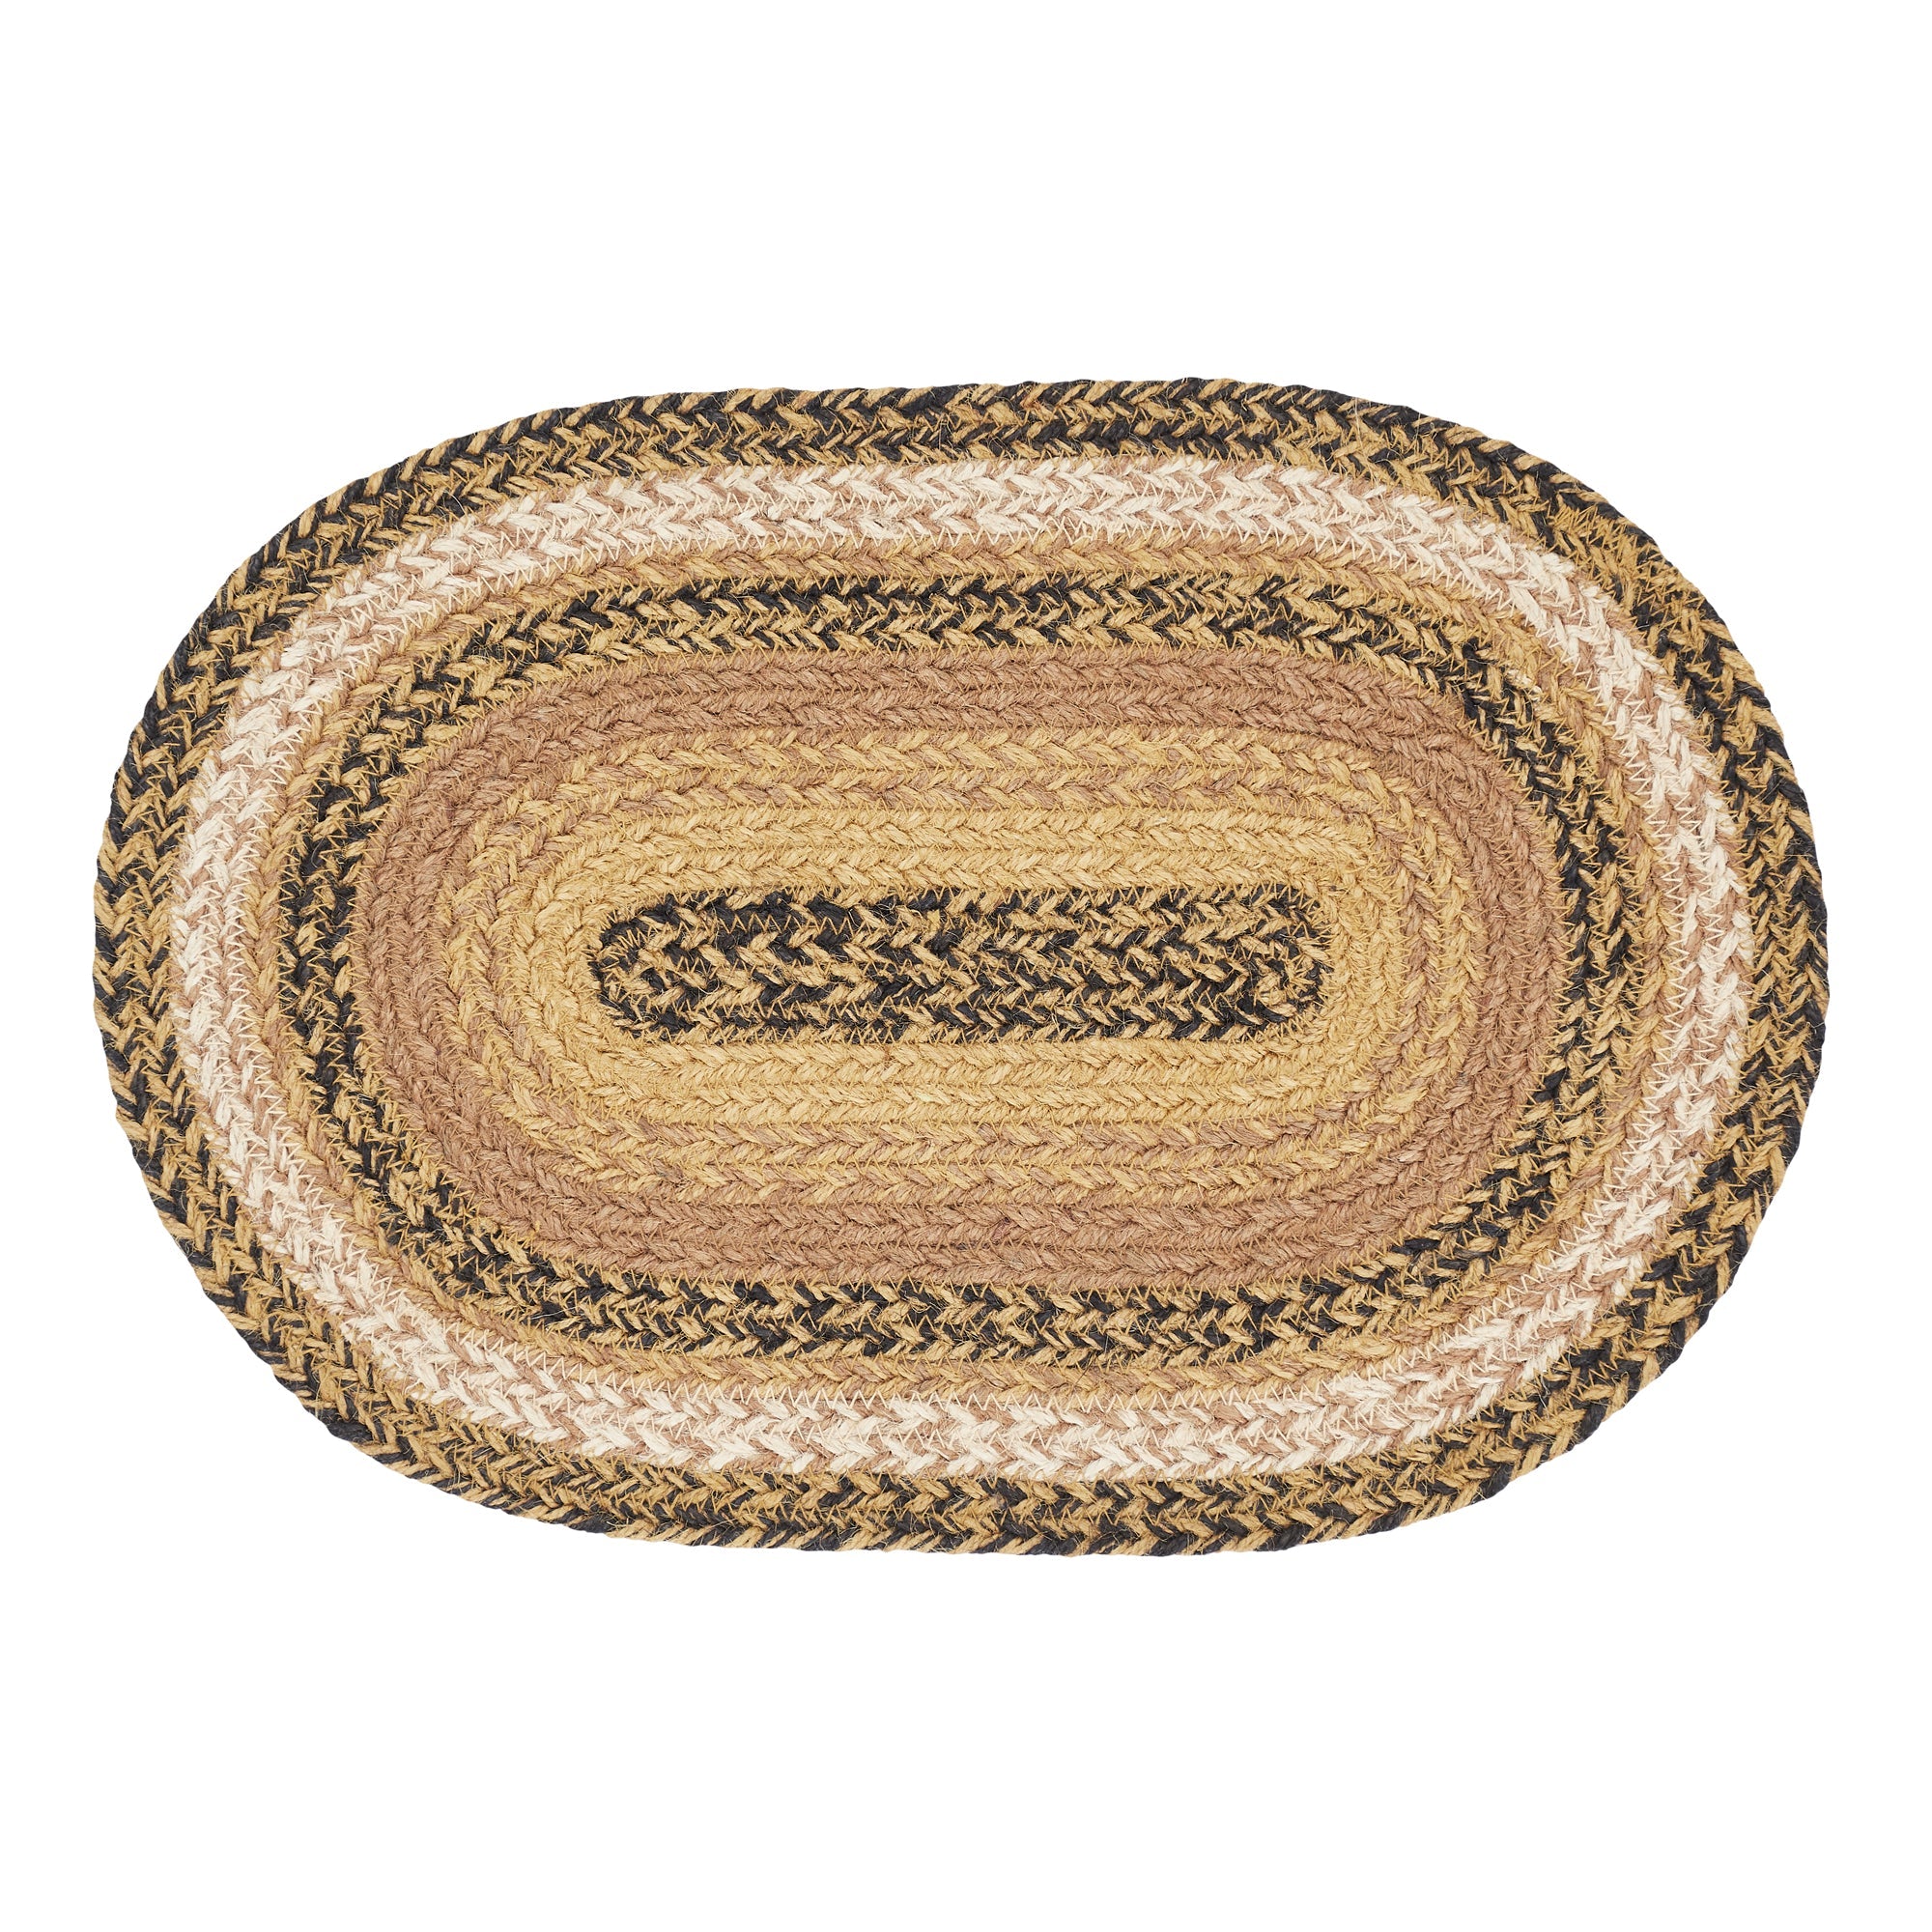 Kettle Grove Jute Braided Oval Placemat 10"x15" VHC Brands